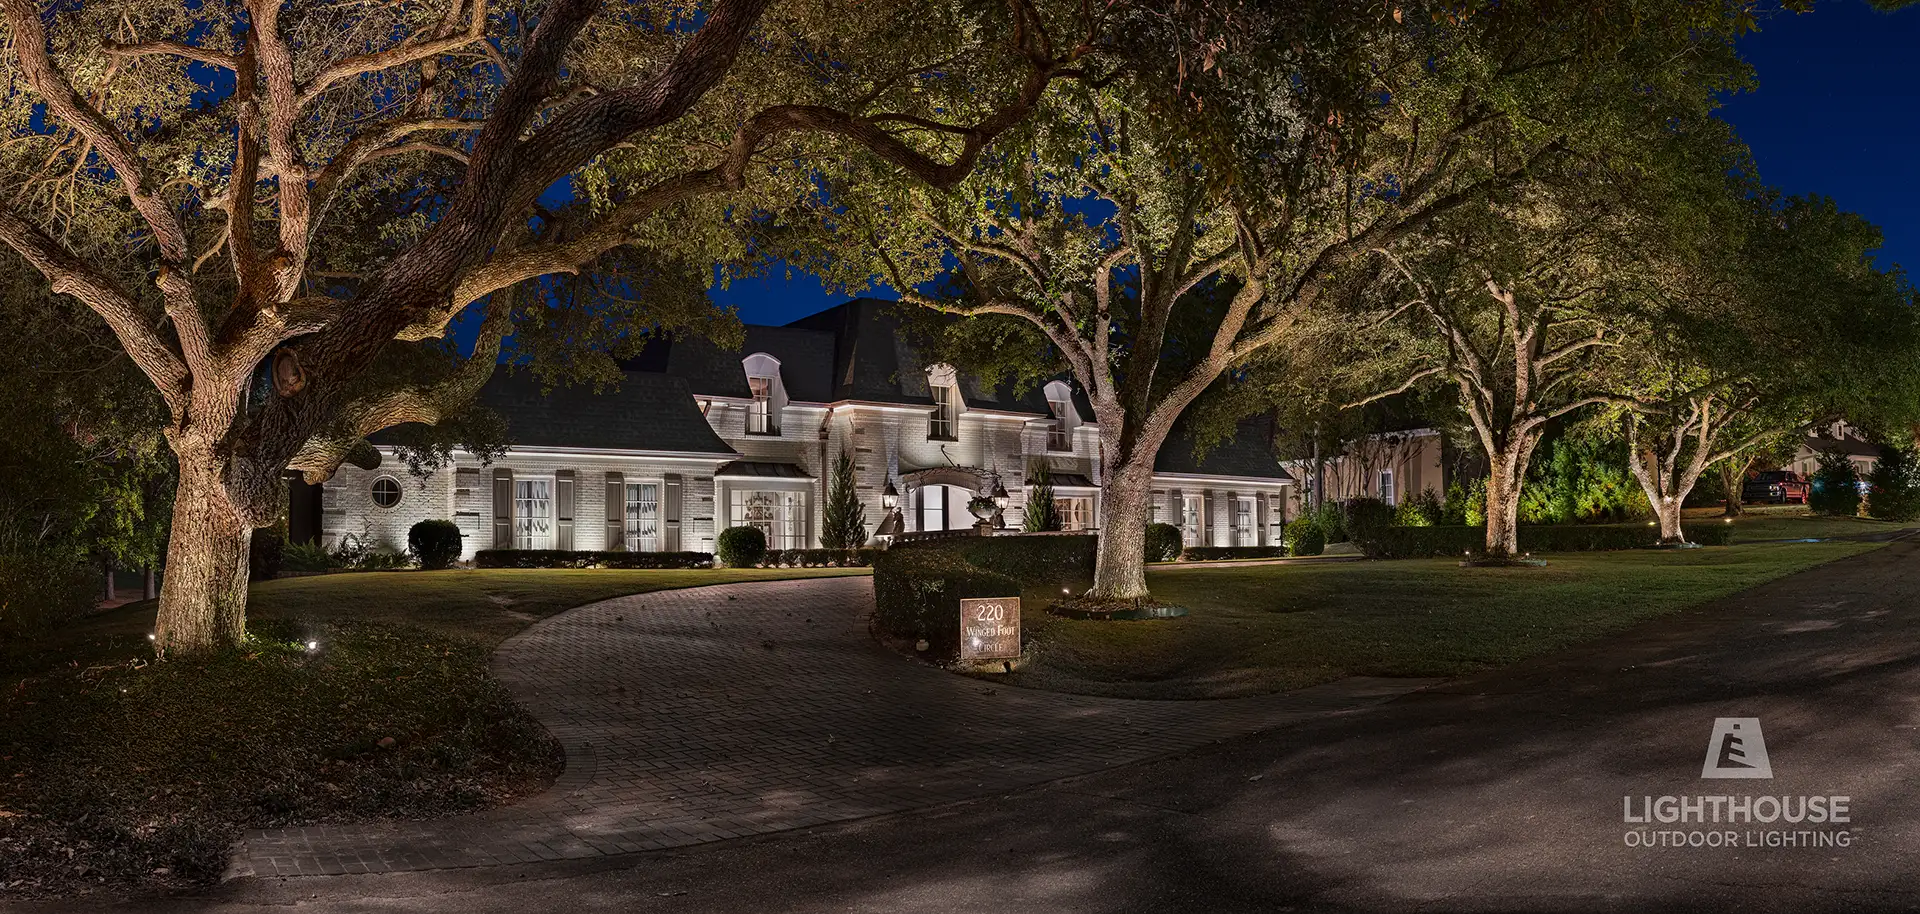 Winged Foot image 3 front of house driveway Lighthouse Outdoor Lighting and Audio Jackson MS